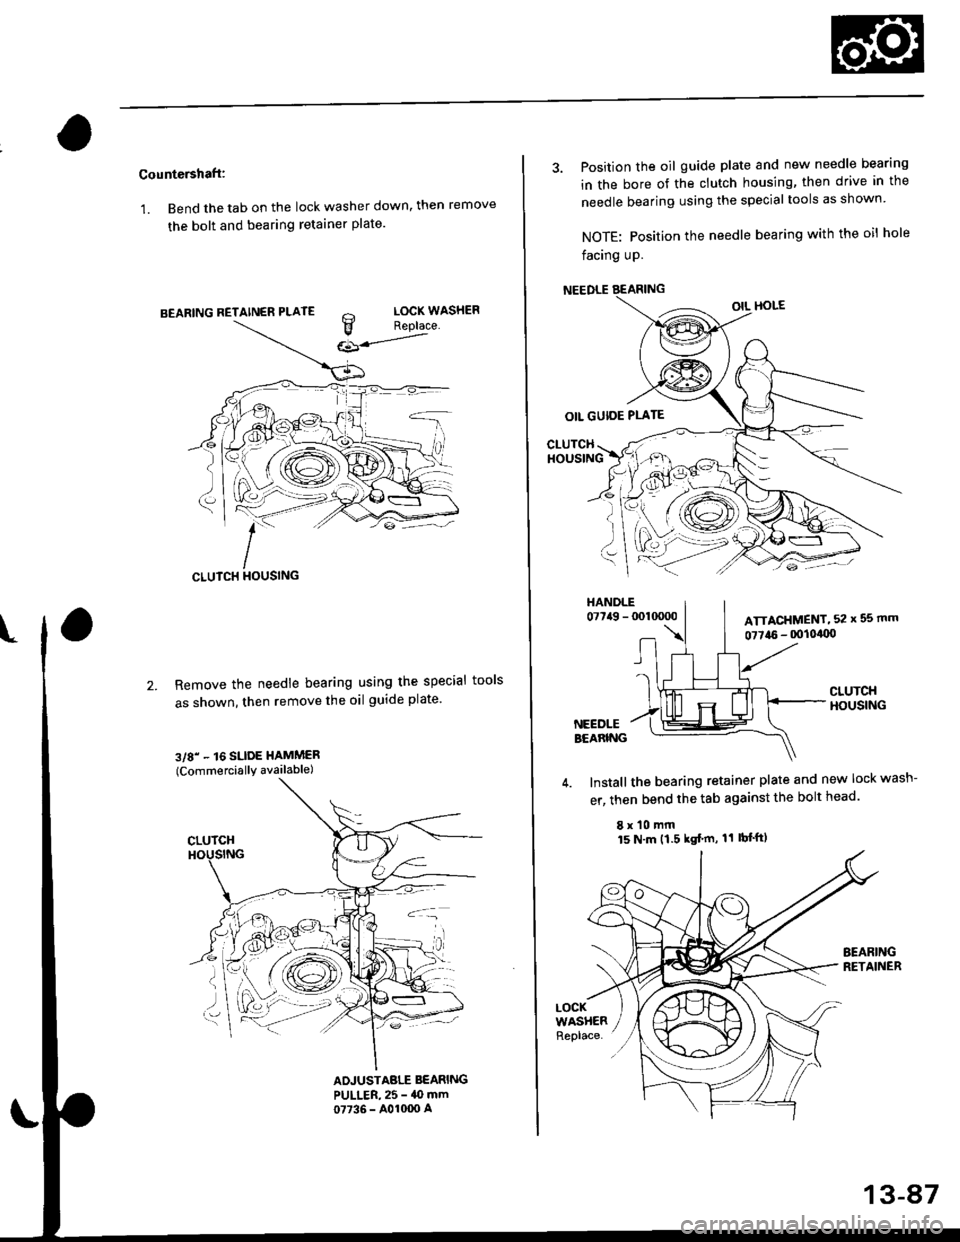 HONDA CIVIC 1996 6.G Service Manual Countershaft:
1. Bend the tab on the lock washer down, then remove
the bolt and bearing retainer plate.
BEARING RETAINER PLATE
cLutcH tlouslNG
Remove the needle bearing using the special tools
as show